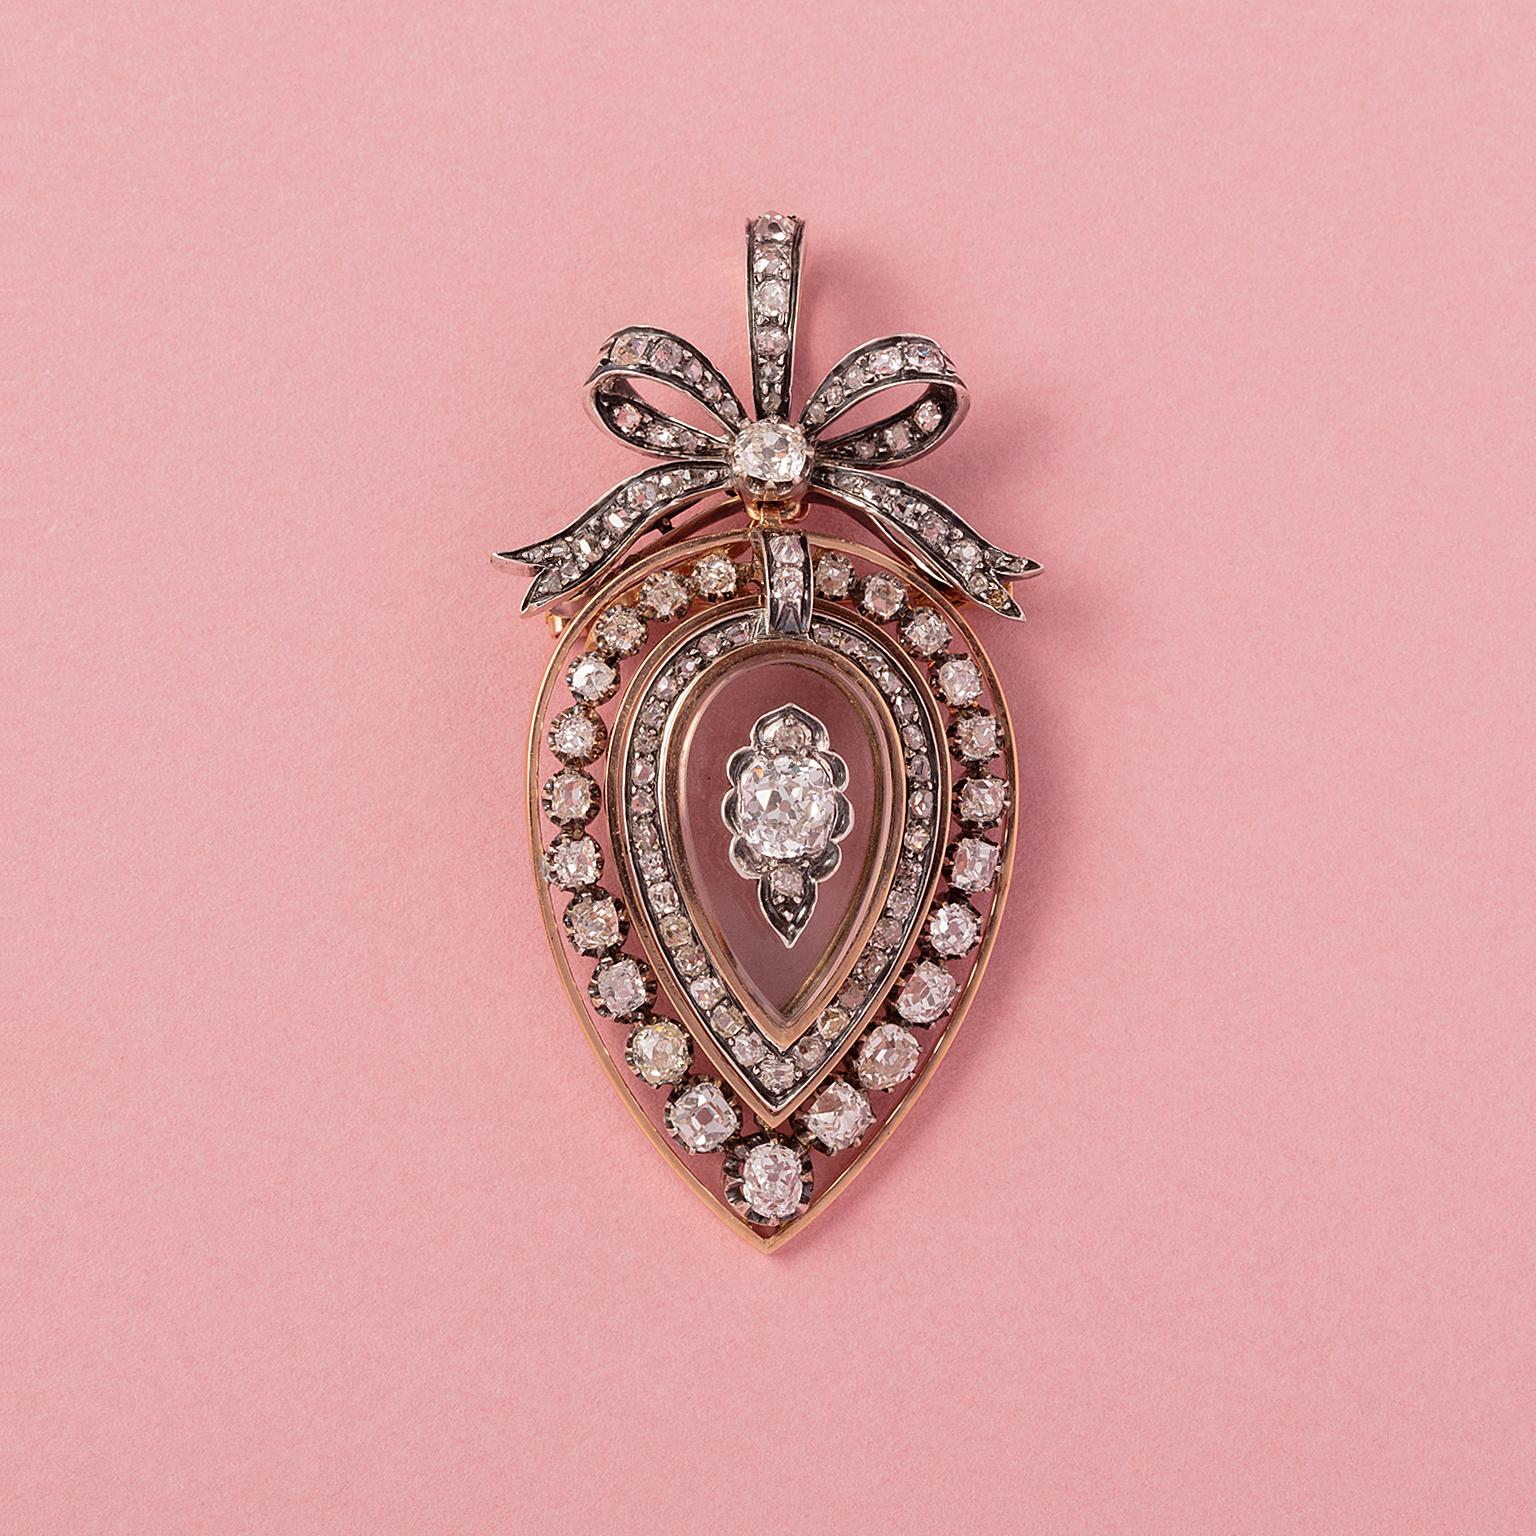 An 18 carat gold and silver locket pendant (or brooch with brooch fitting) in a stylized heart or drop shape with an elegant bow on top. In the middle a drop shaped rock crystal incrusted with a cushion cut diamond (app. 0.9 carat I-J SI 2) and two